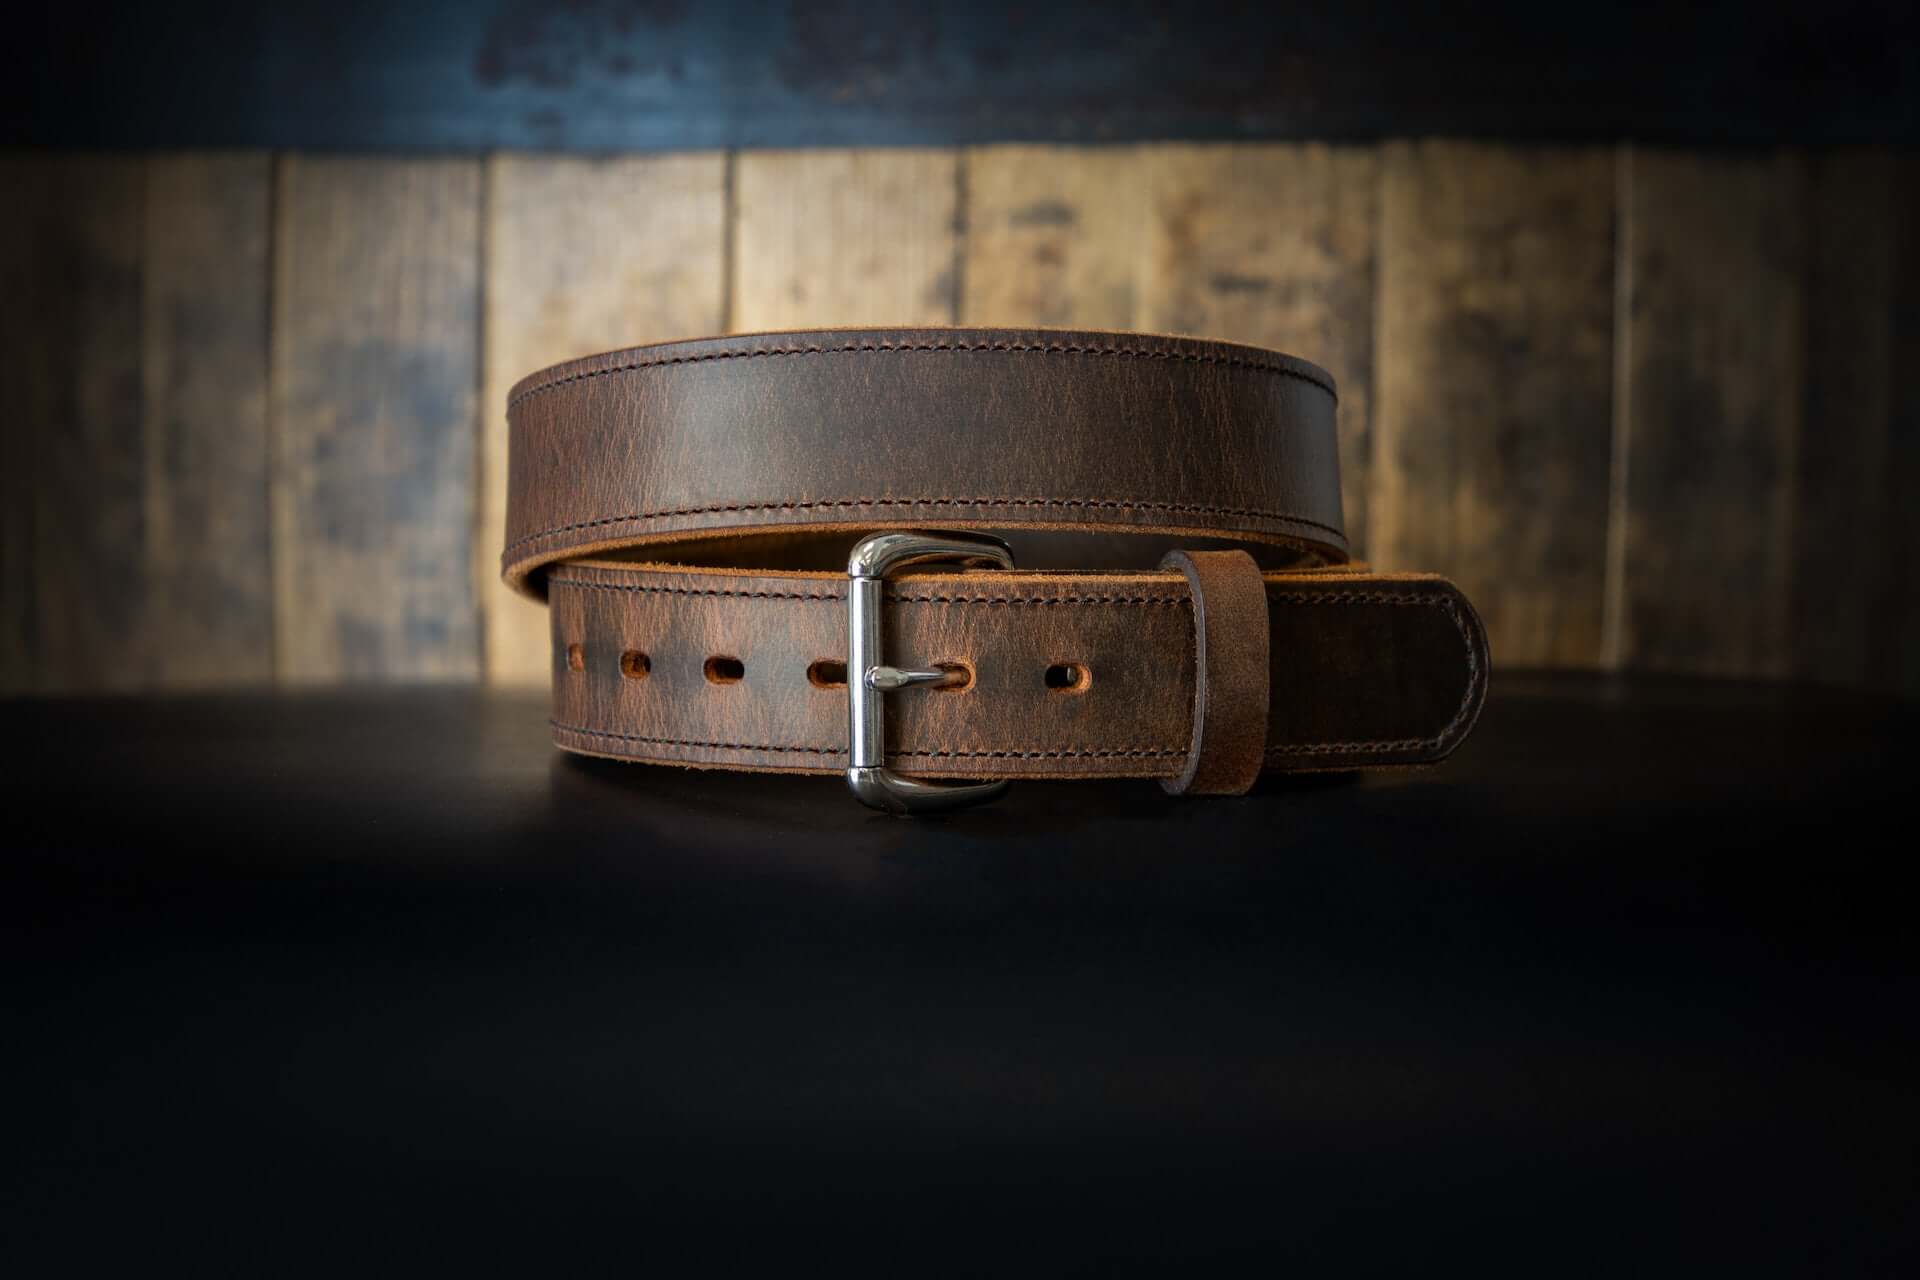 A brown leather belt rolled up.